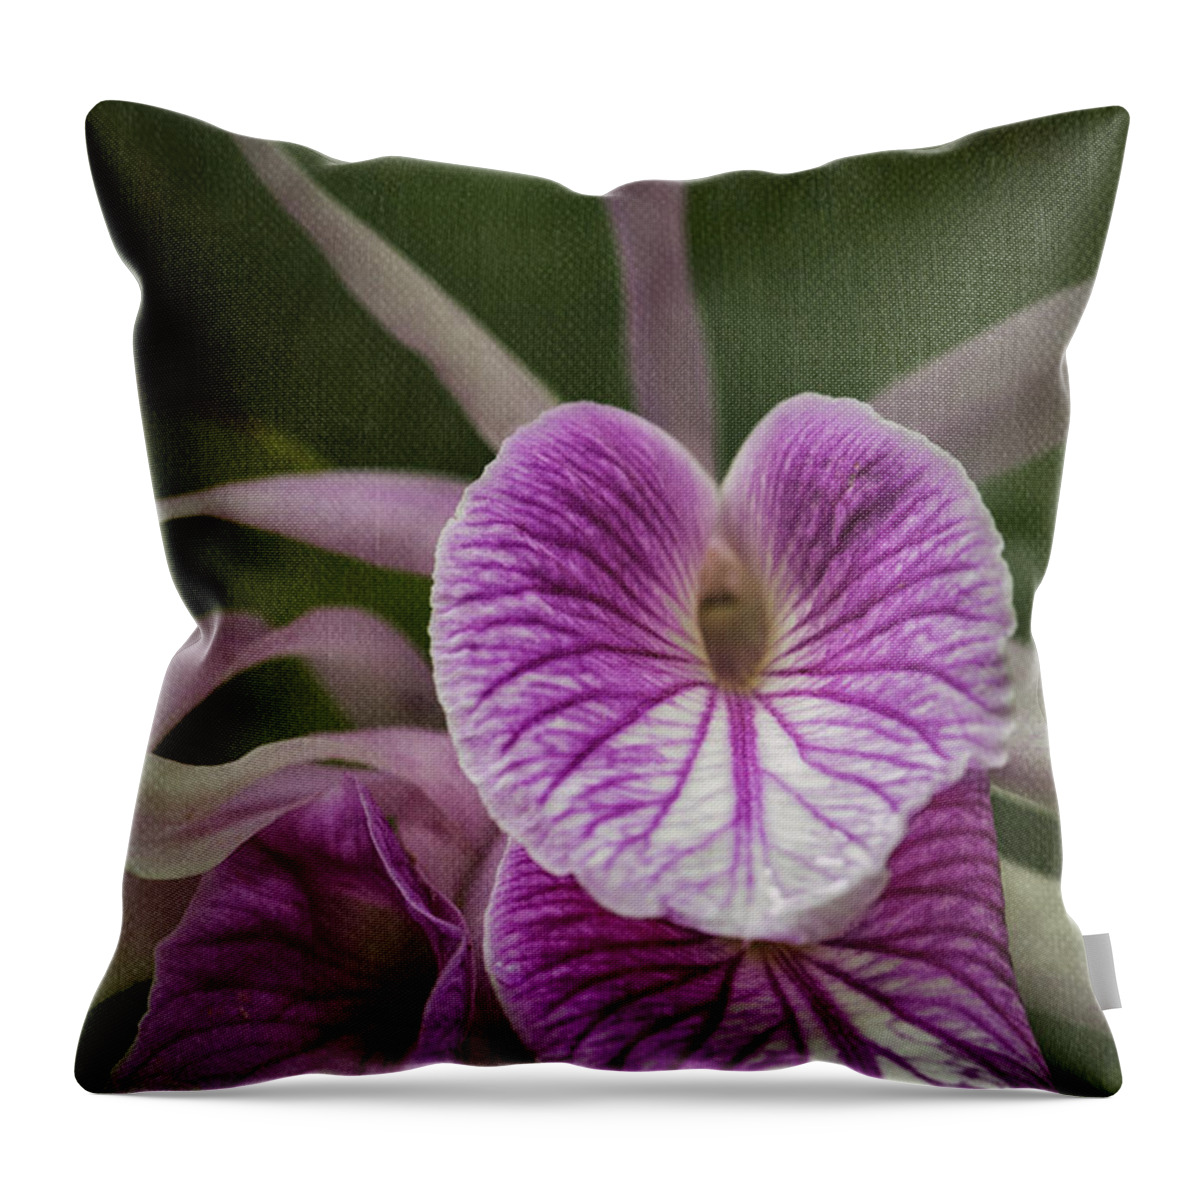 Orchid Throw Pillow featuring the photograph Brassocattleya Morning Glory by Fran Gallogly